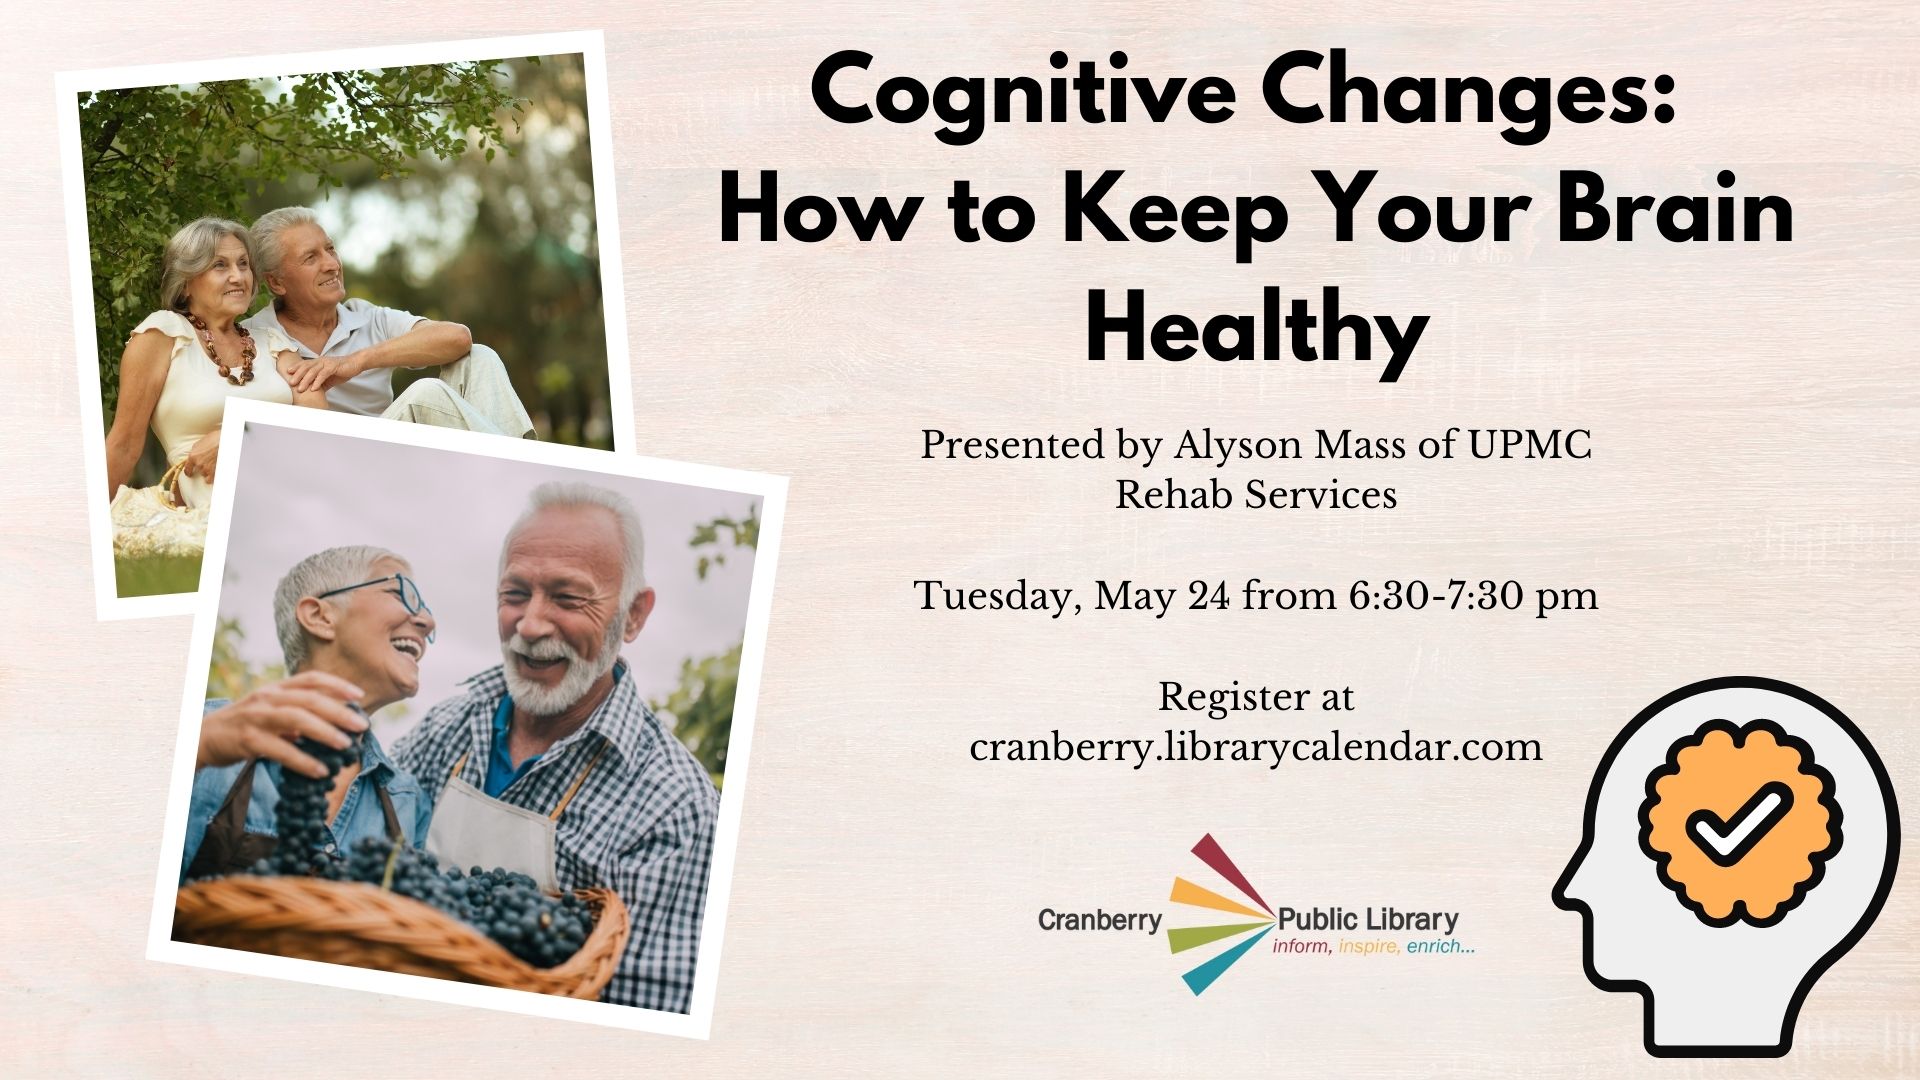 Flyer for Cognitive Changes program with photos of happy older people